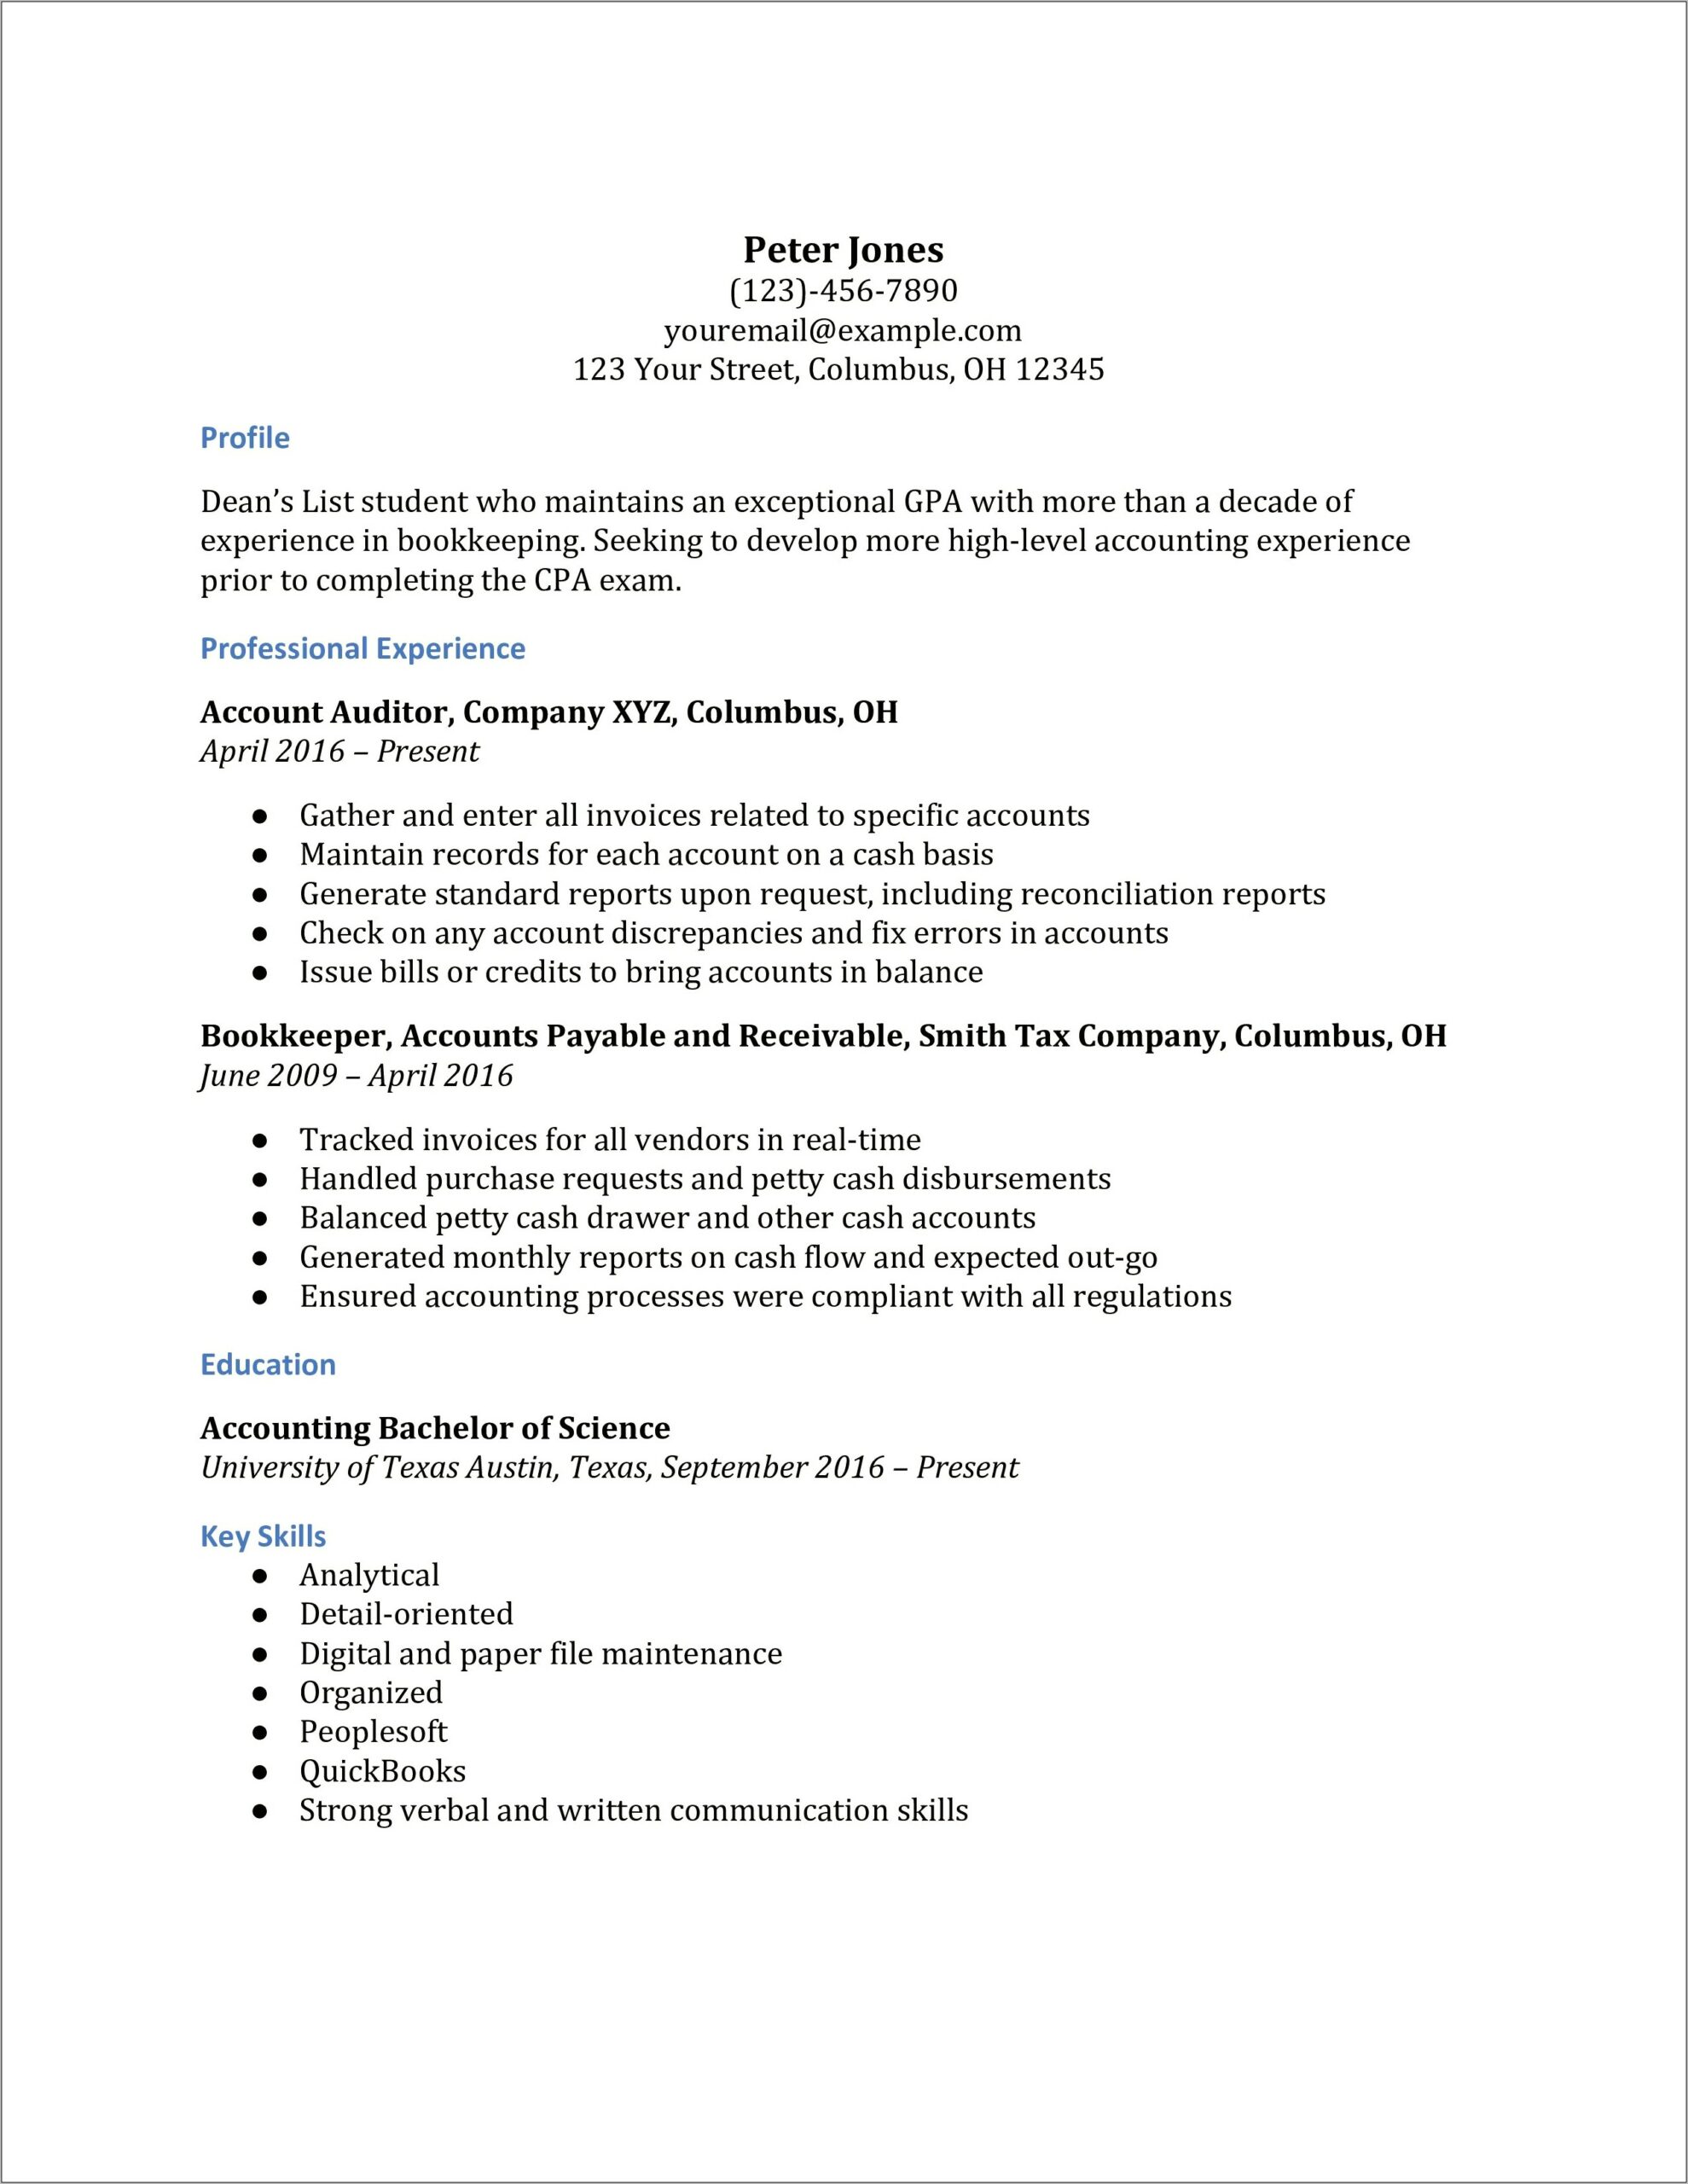 Resume Examples For Students In University